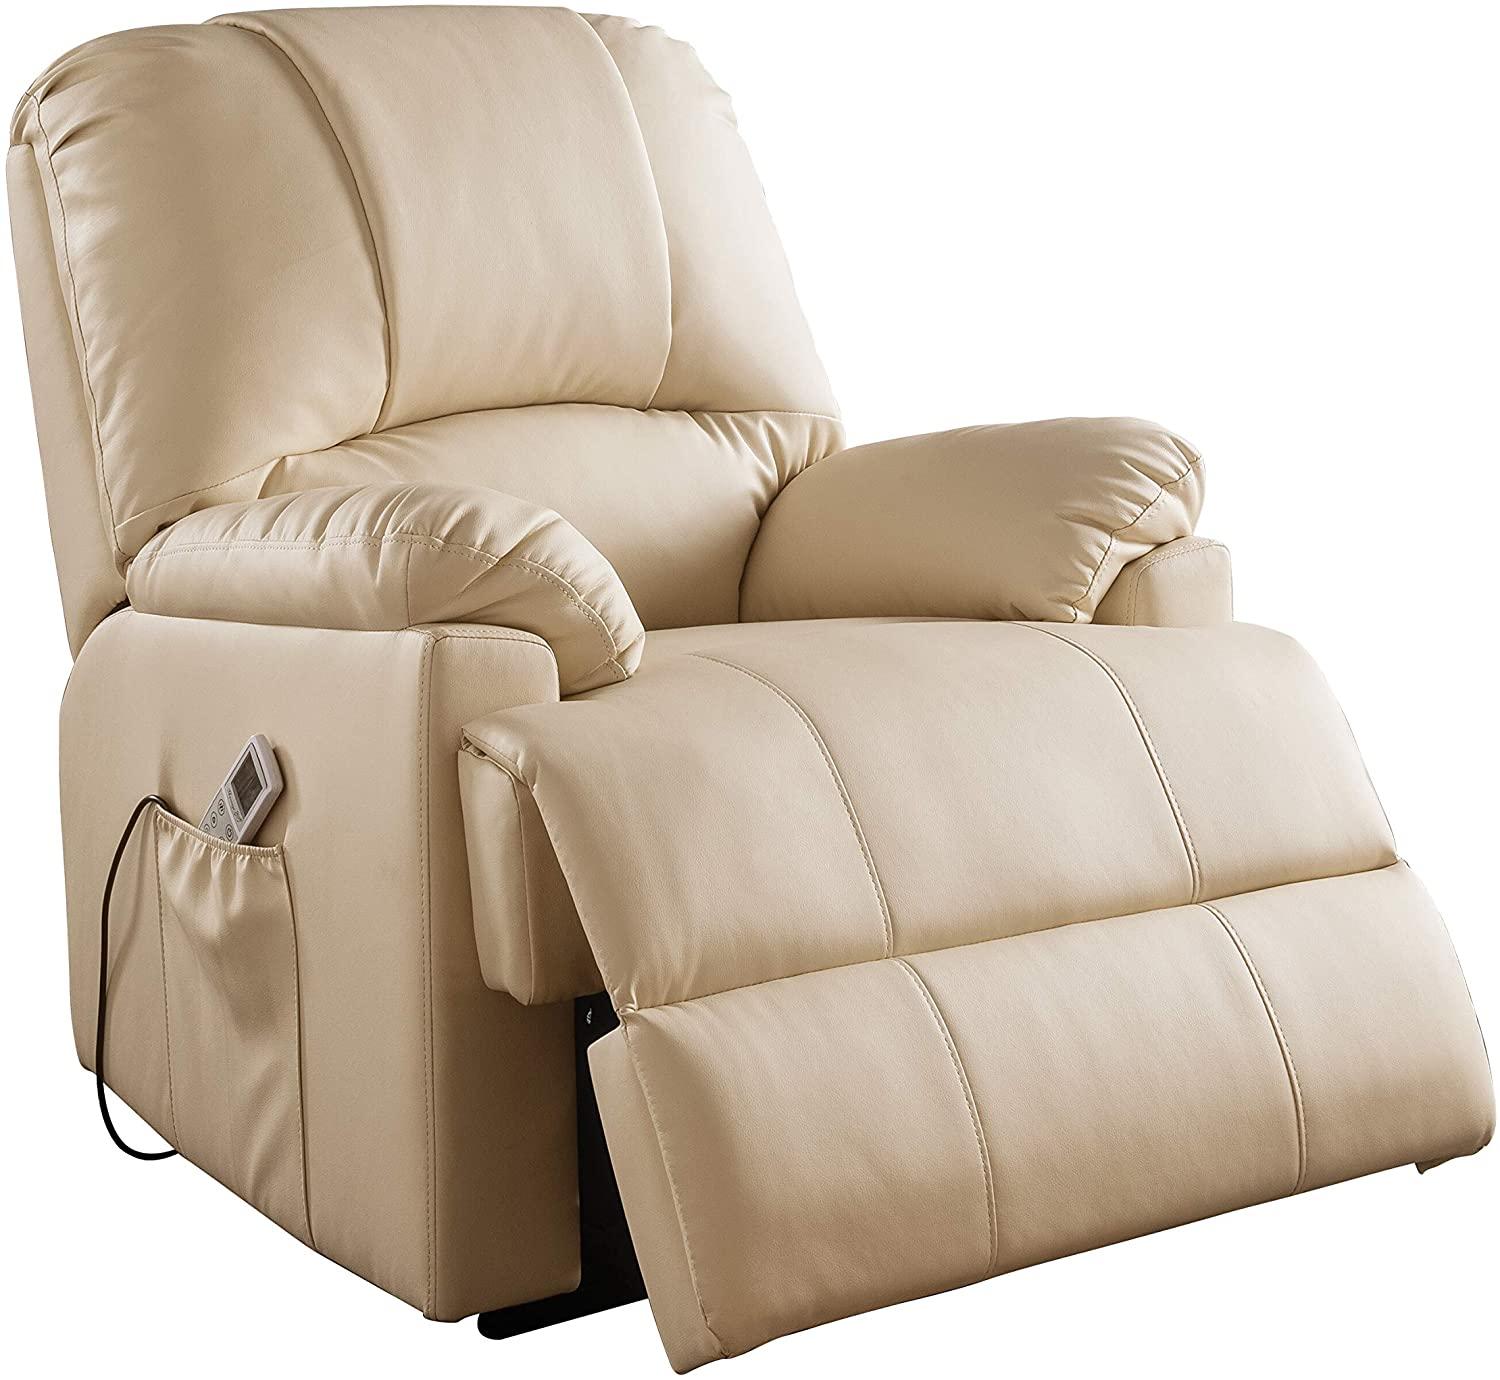 

    
Contemporary Beige Faux Leather PU Recliner  by Acme Ixora 59286
